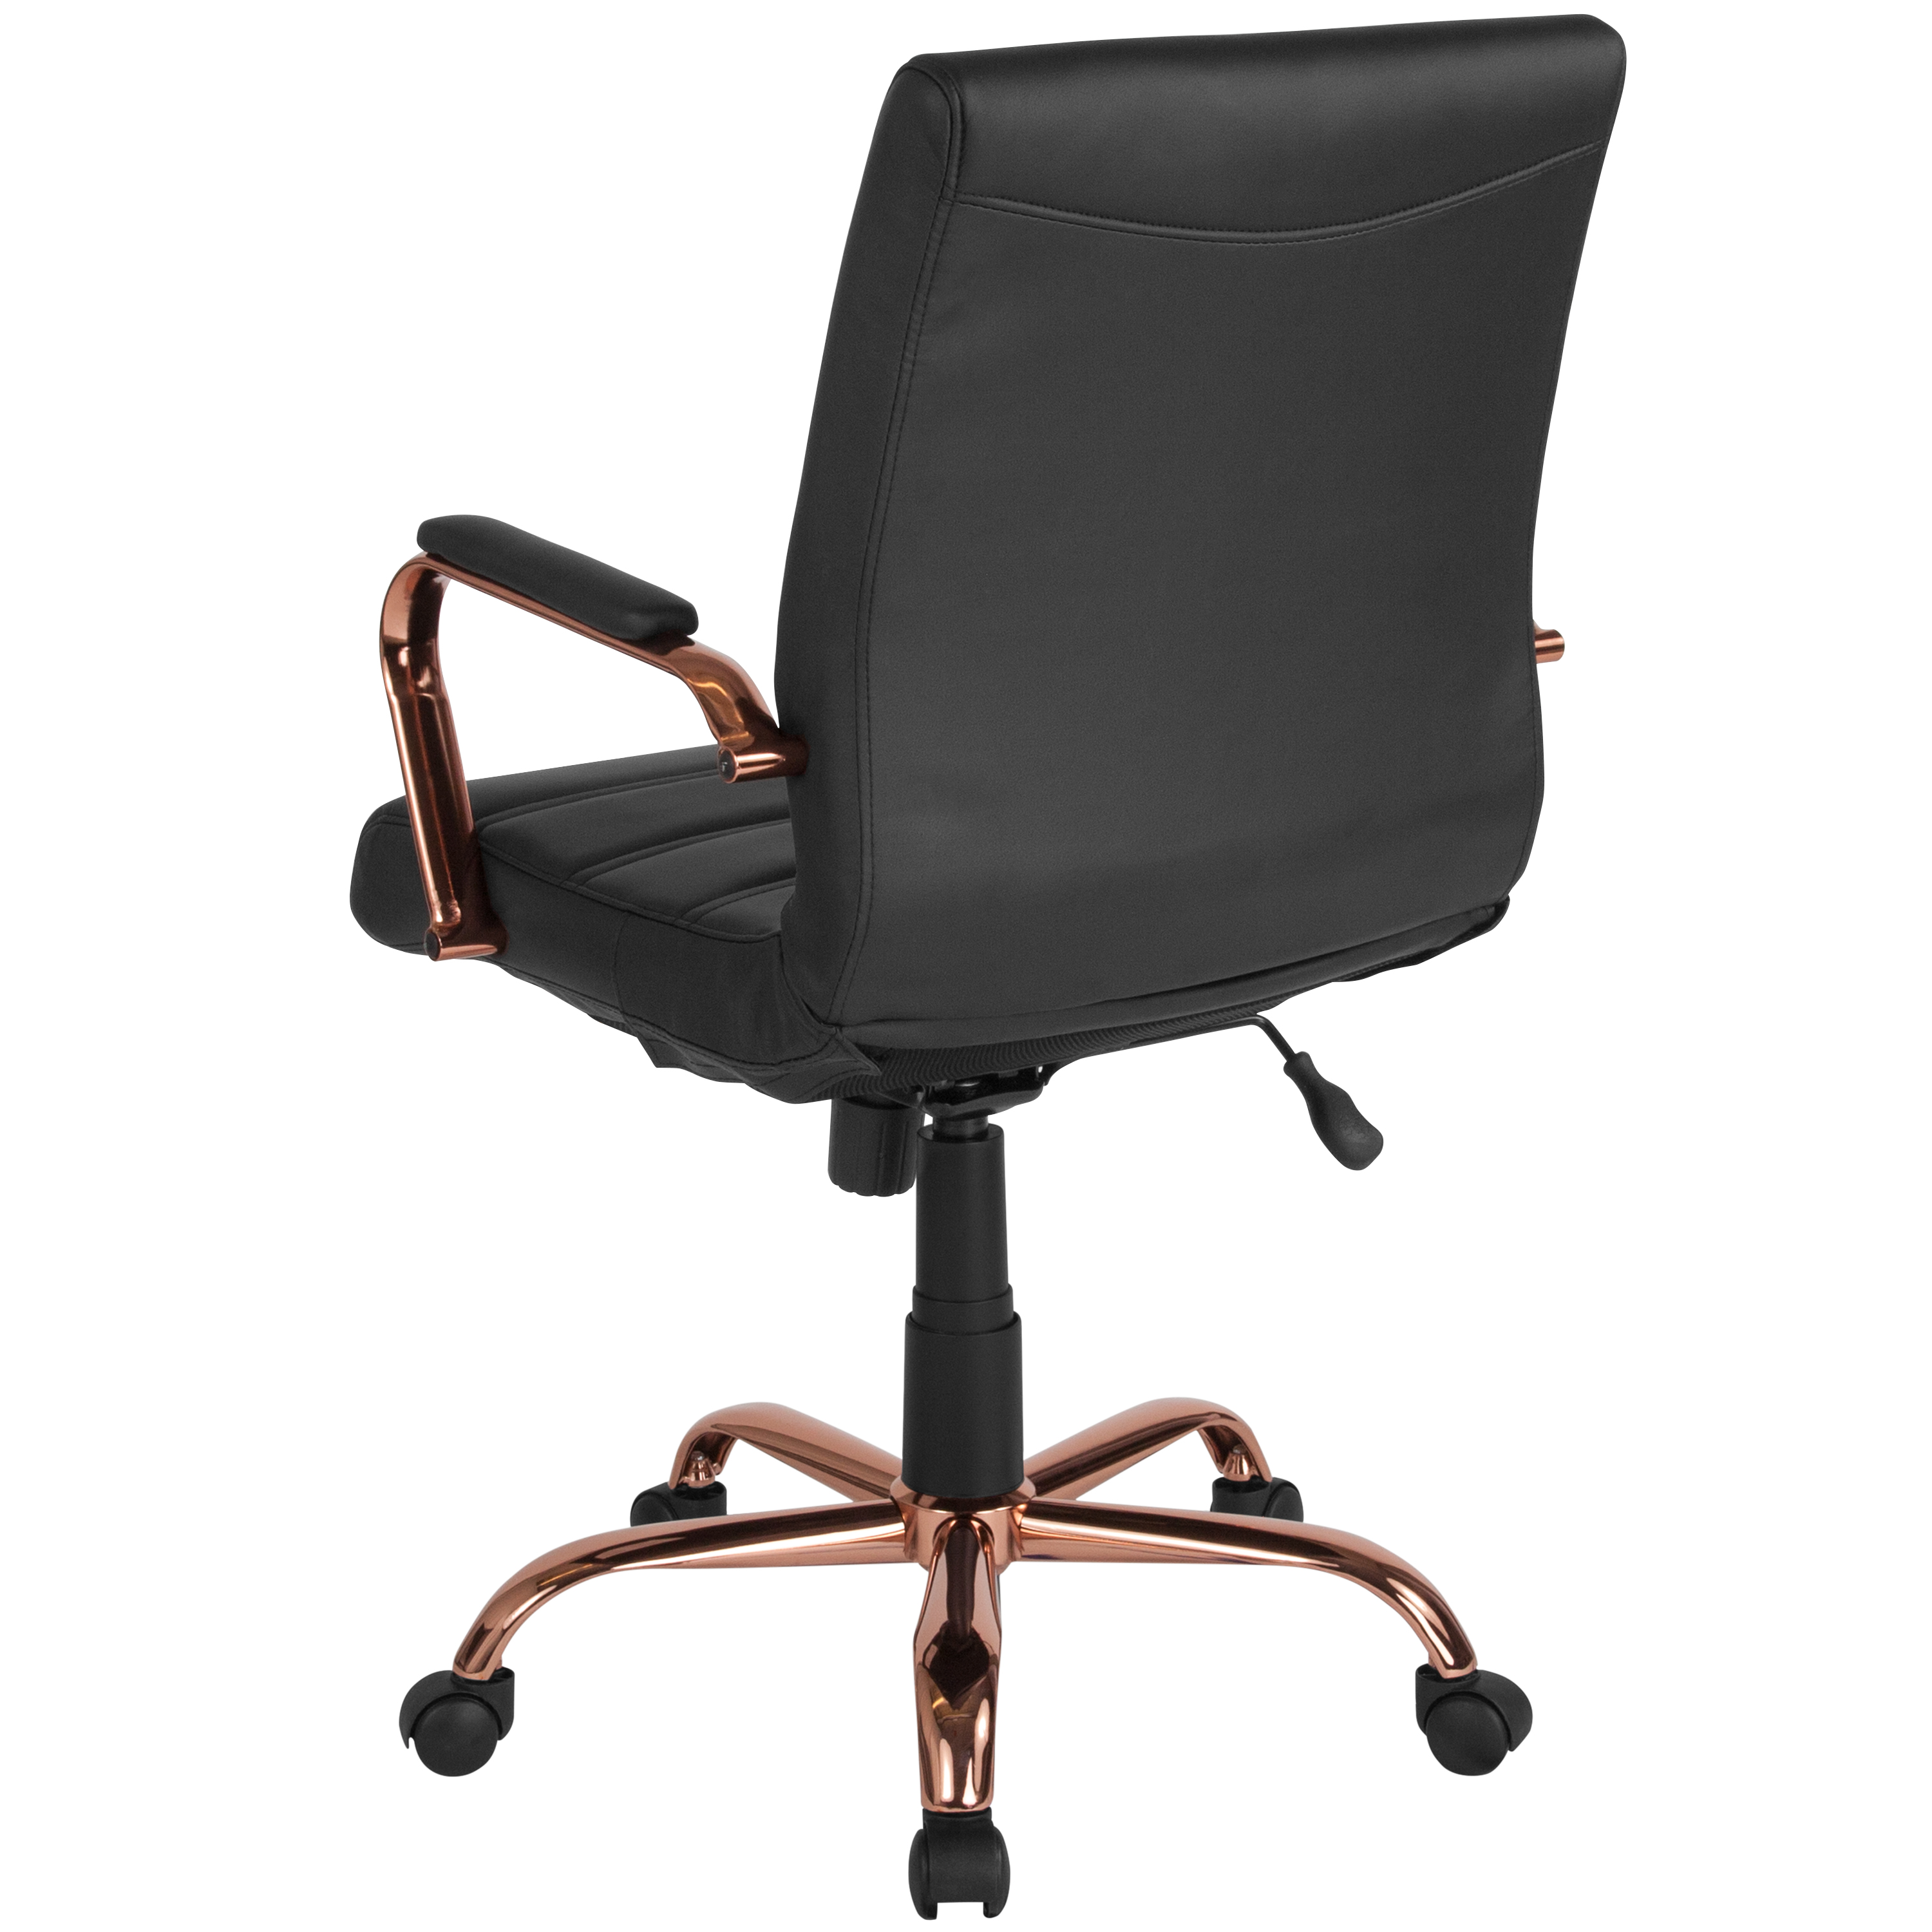 Flash Furniture Mid-Back Black LeatherSoft Executive Swivel Office Chair with Rose Gold Frame and Arms